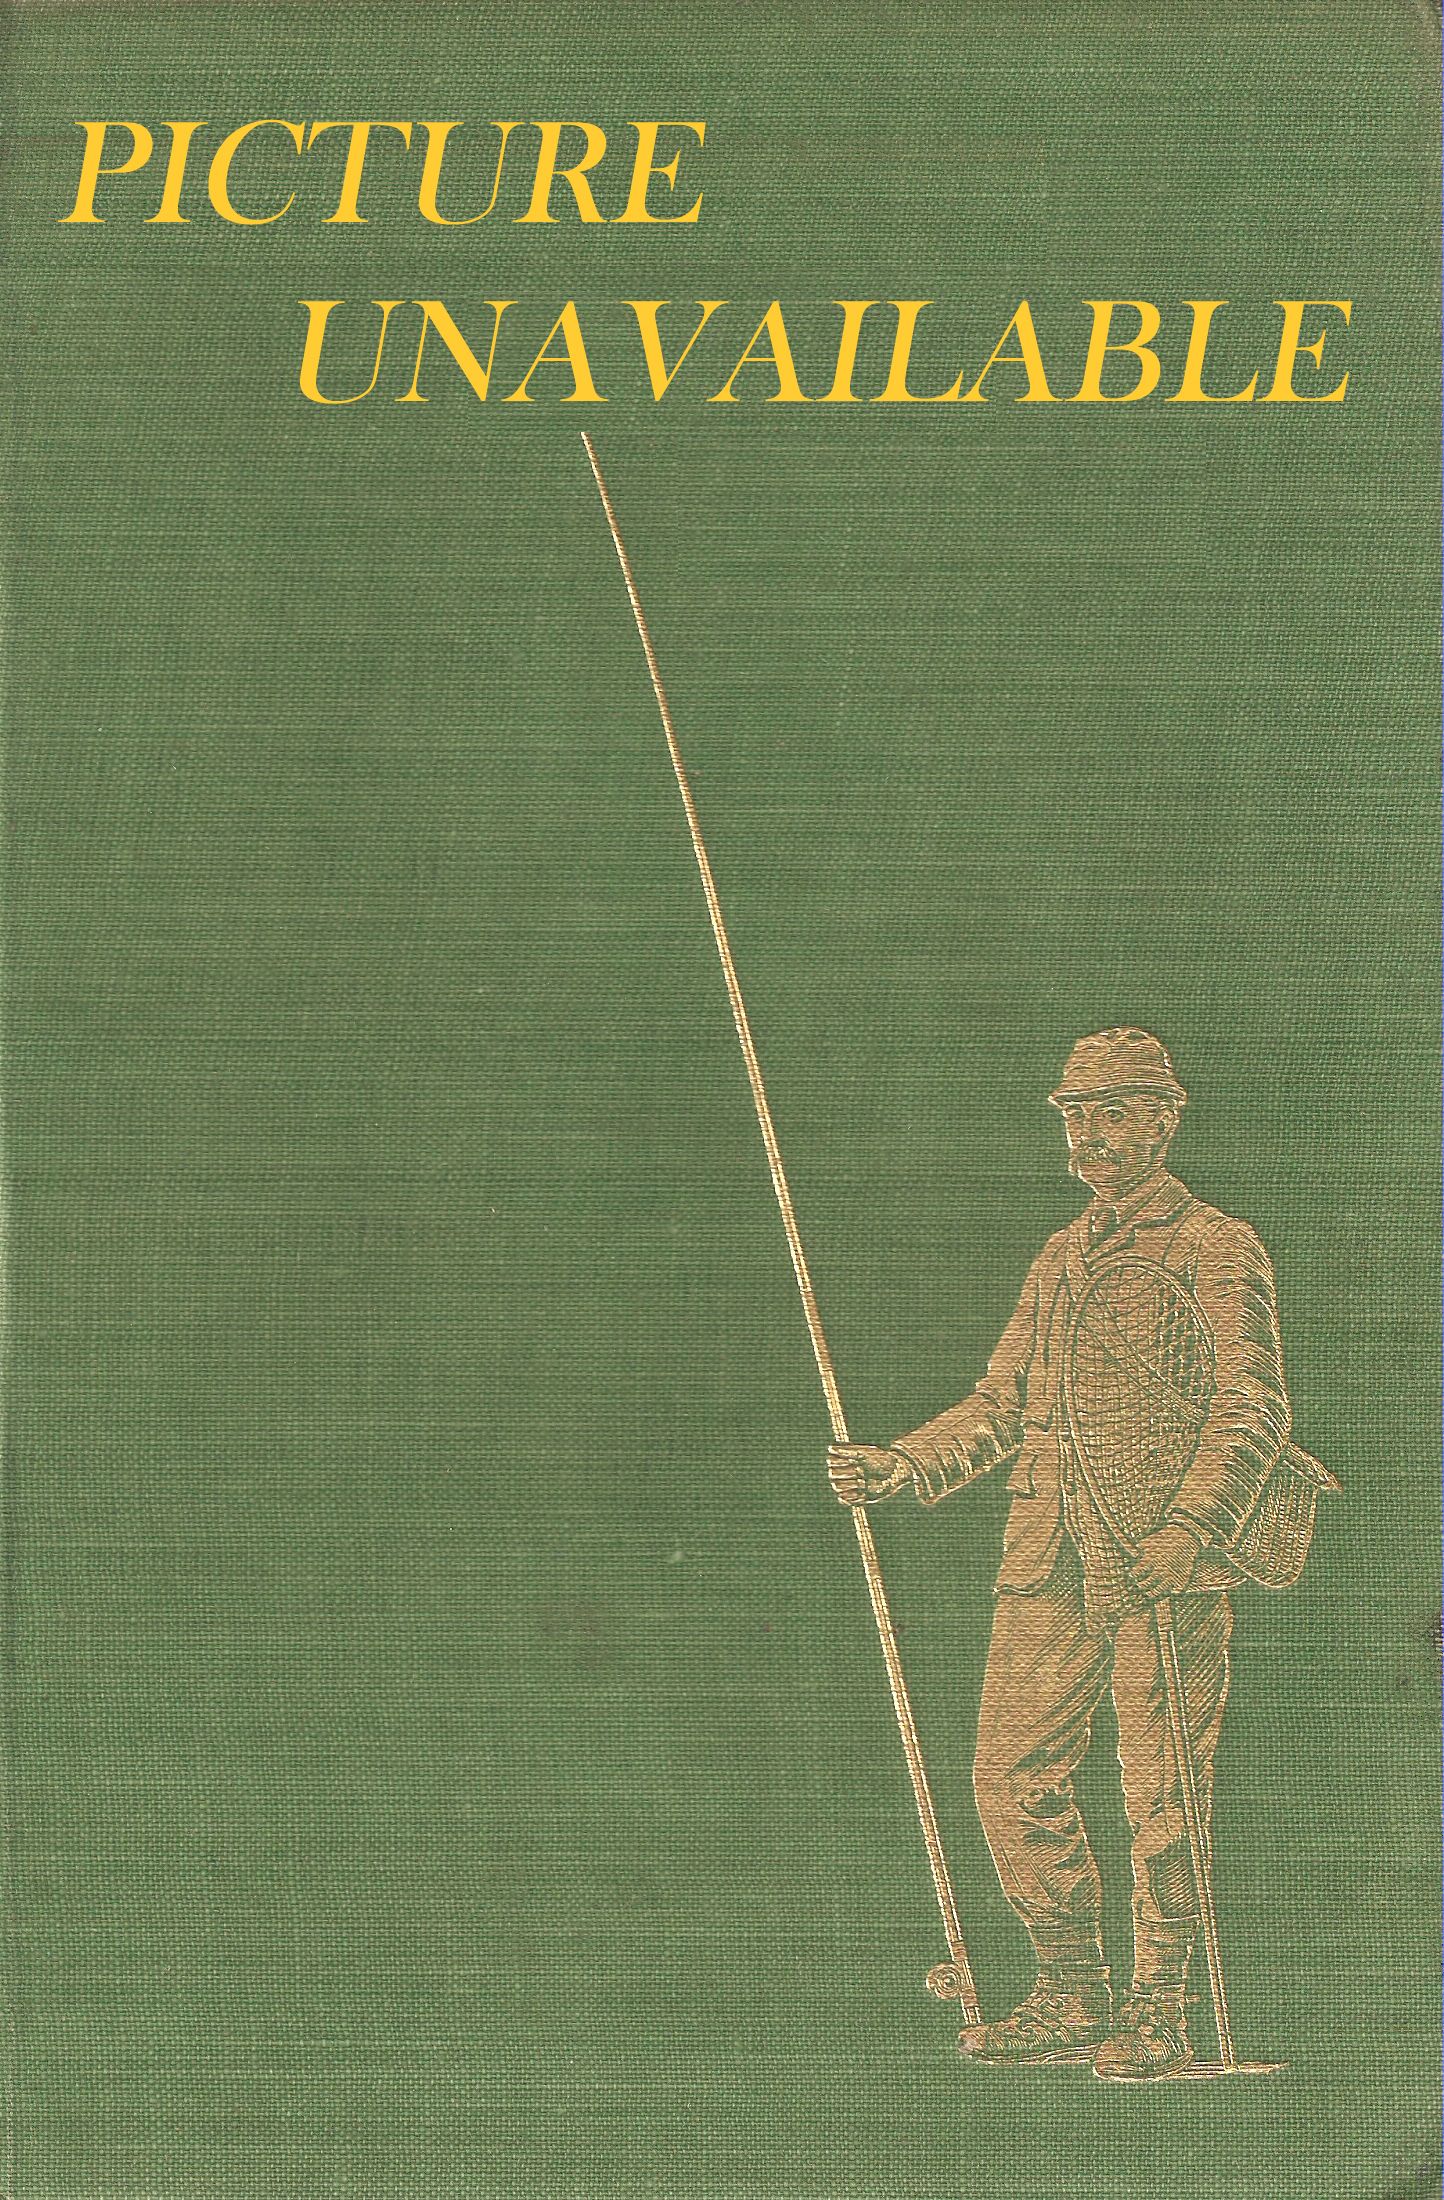 BARBEL: HOW TO CATCH THEM. By S. Donald Stone. Series editor Kenneth  Mansfield. 1960 reprint.